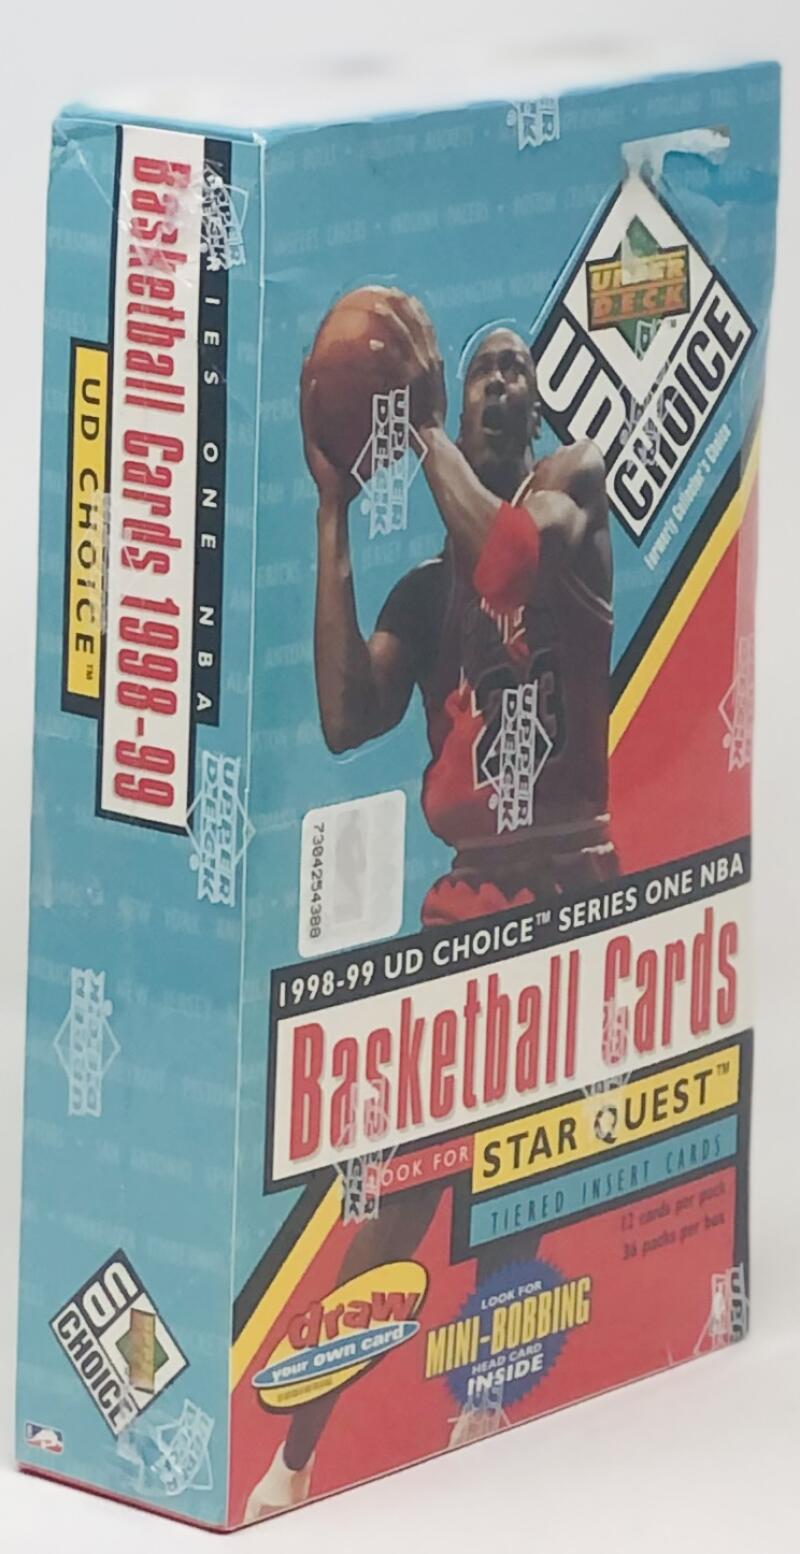 1998-99 UD Choice Series One Star Quest Basketball Box Image 1